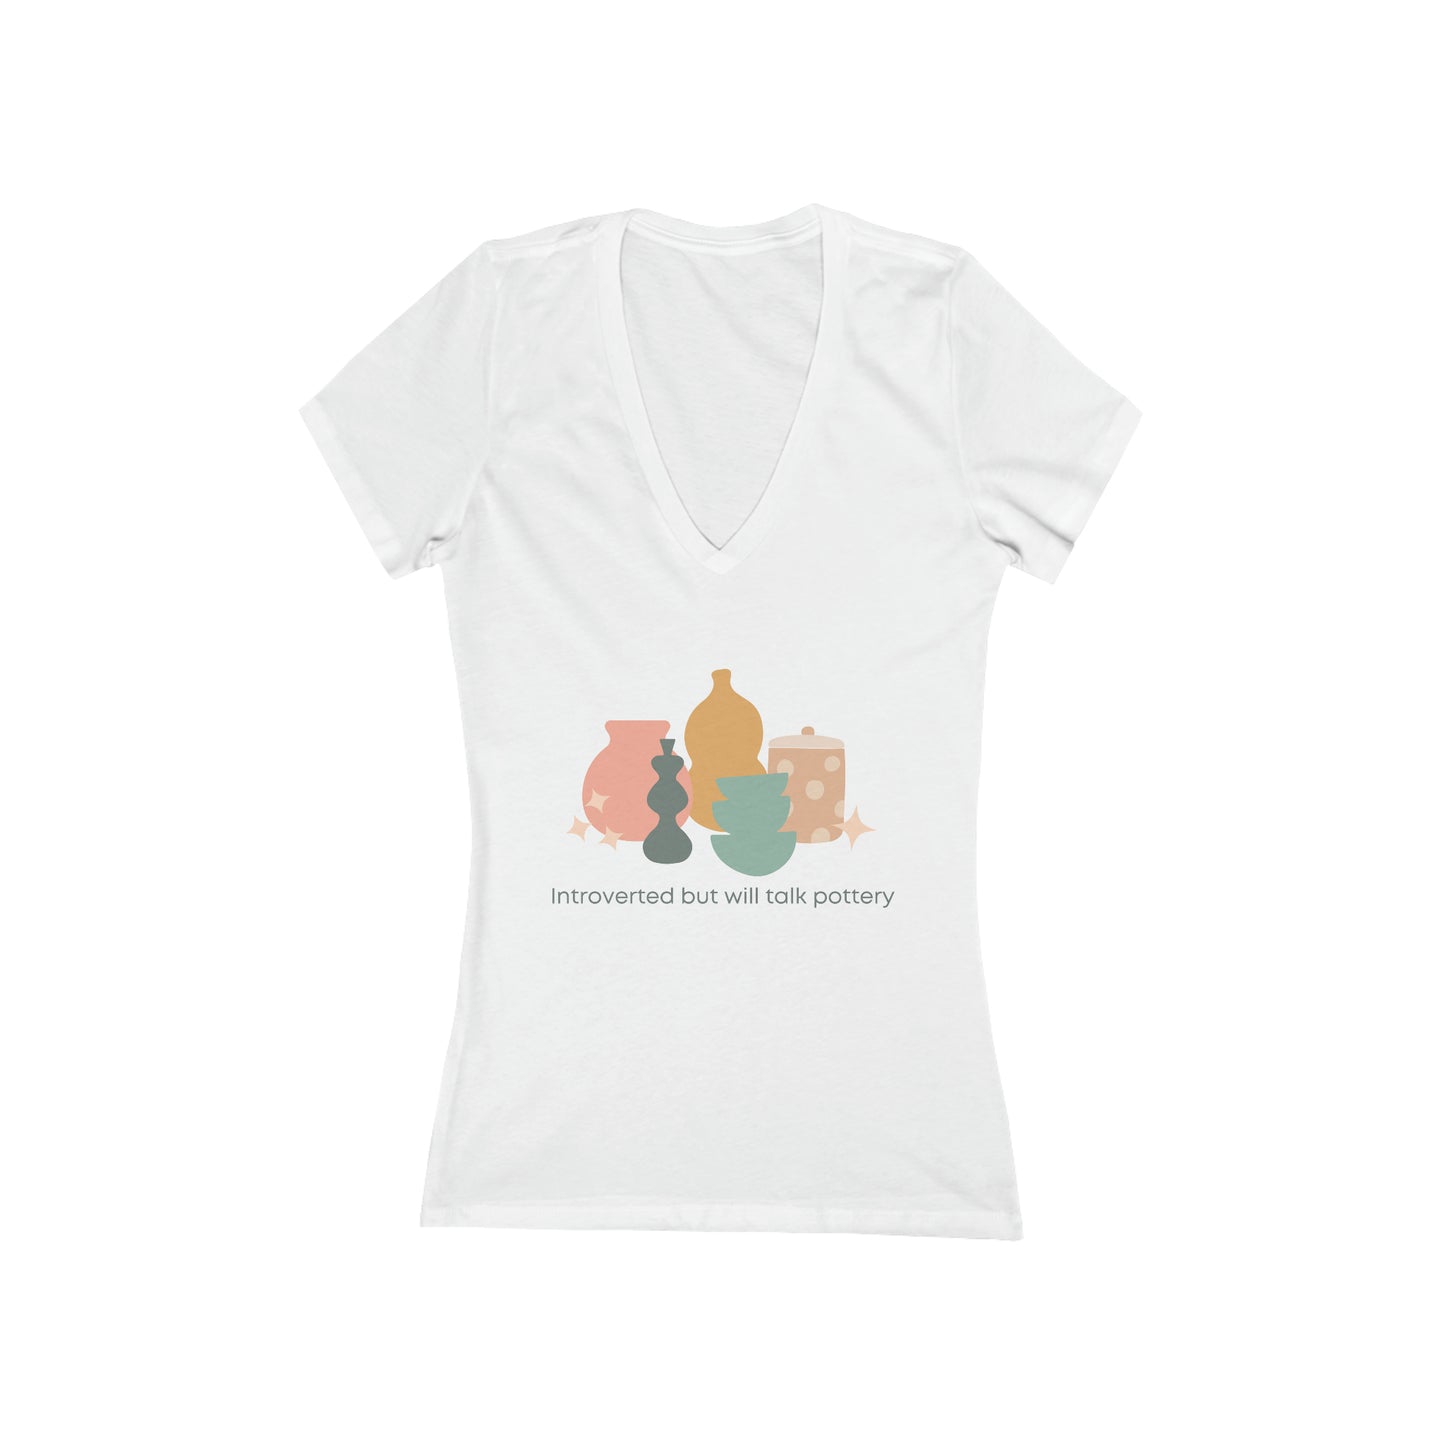 'Introverted but will talk pottery' - Women's Jersey Short Sleeve Deep V-Neck Tee